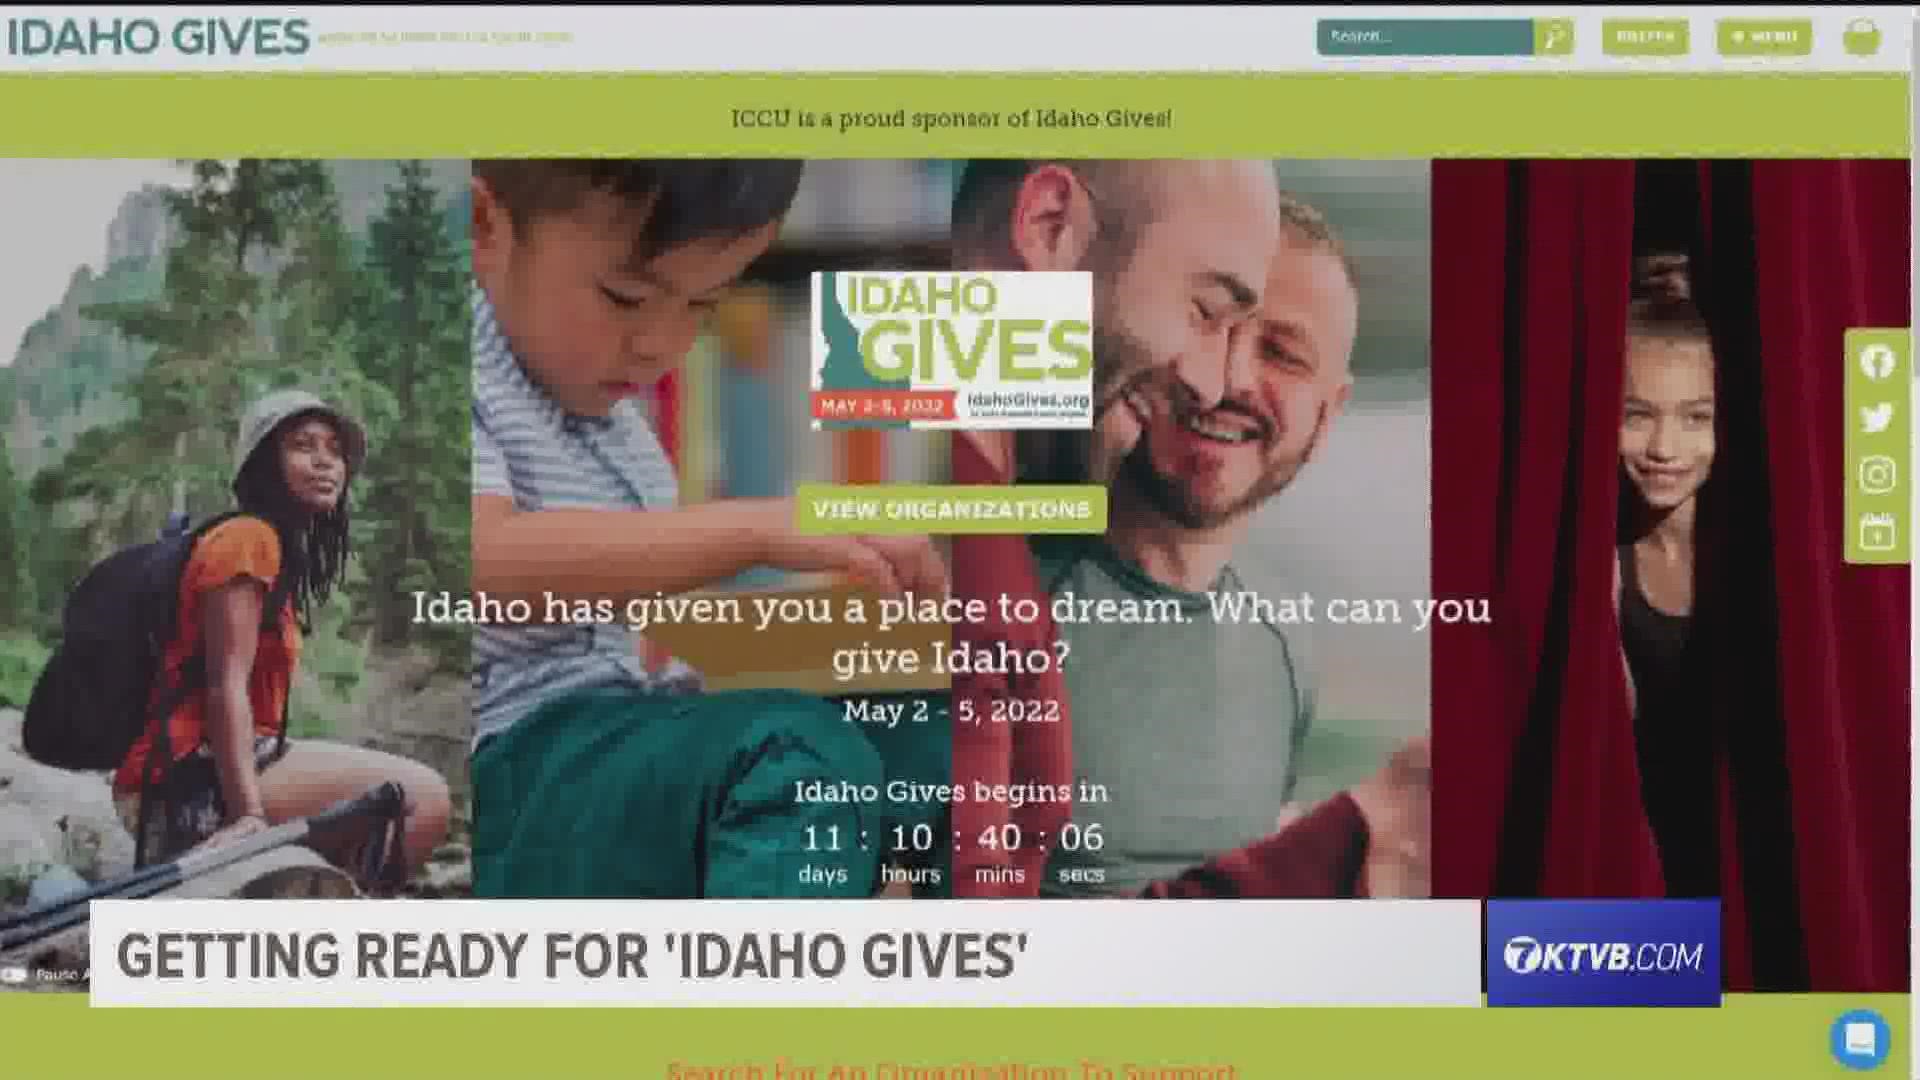 Over its first nine years Idaho Gives has raised more than $16 million for hundreds of Idaho nonprofits